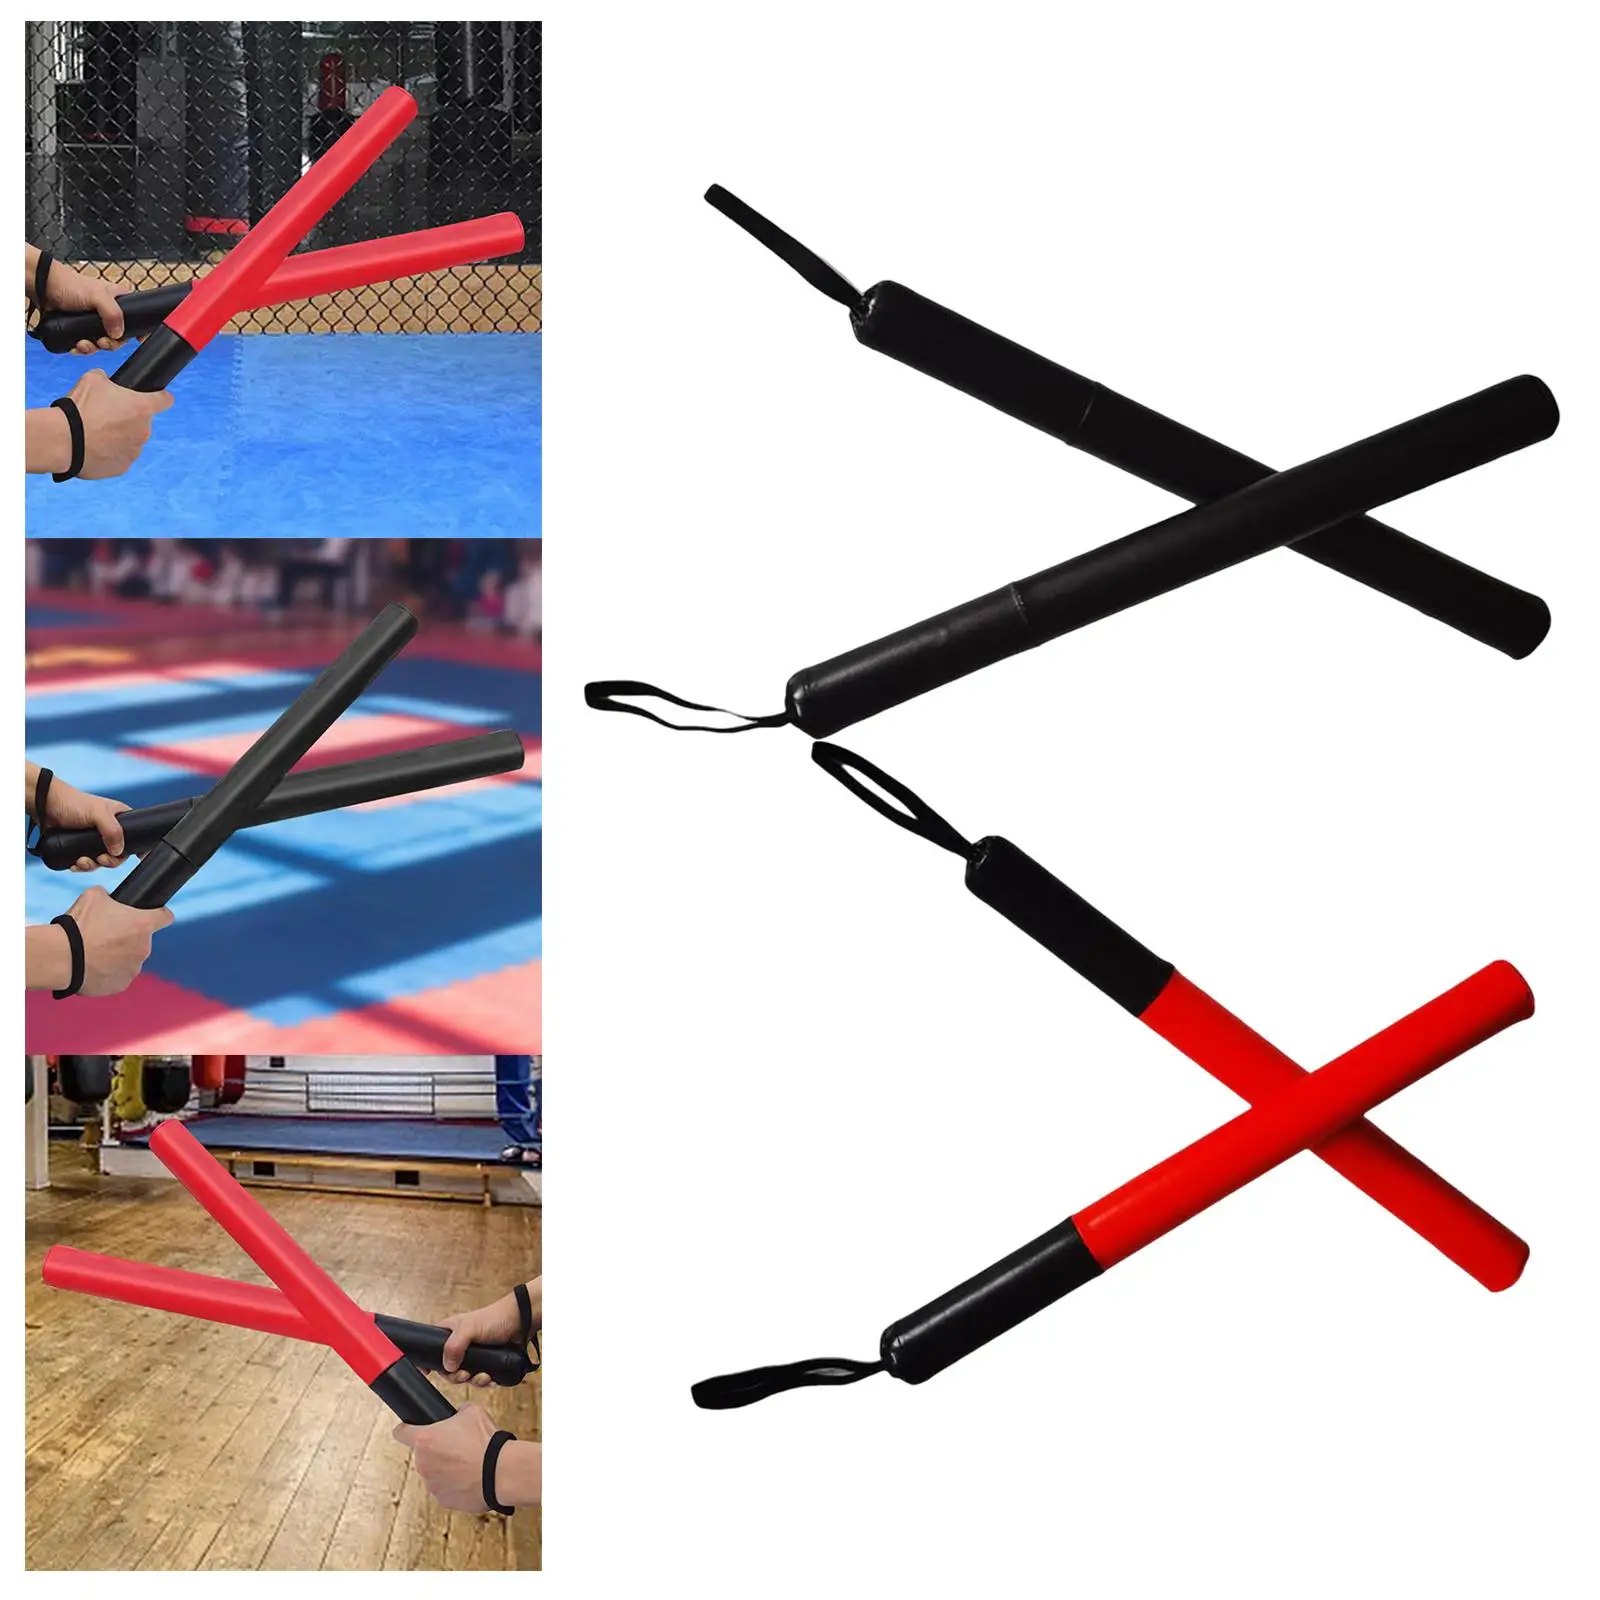 2Pcs Boxing Training Rods Boxing Training Equipment Target Boxing Punching Pads Tool PU Leather for Fighting Flexibility Speed